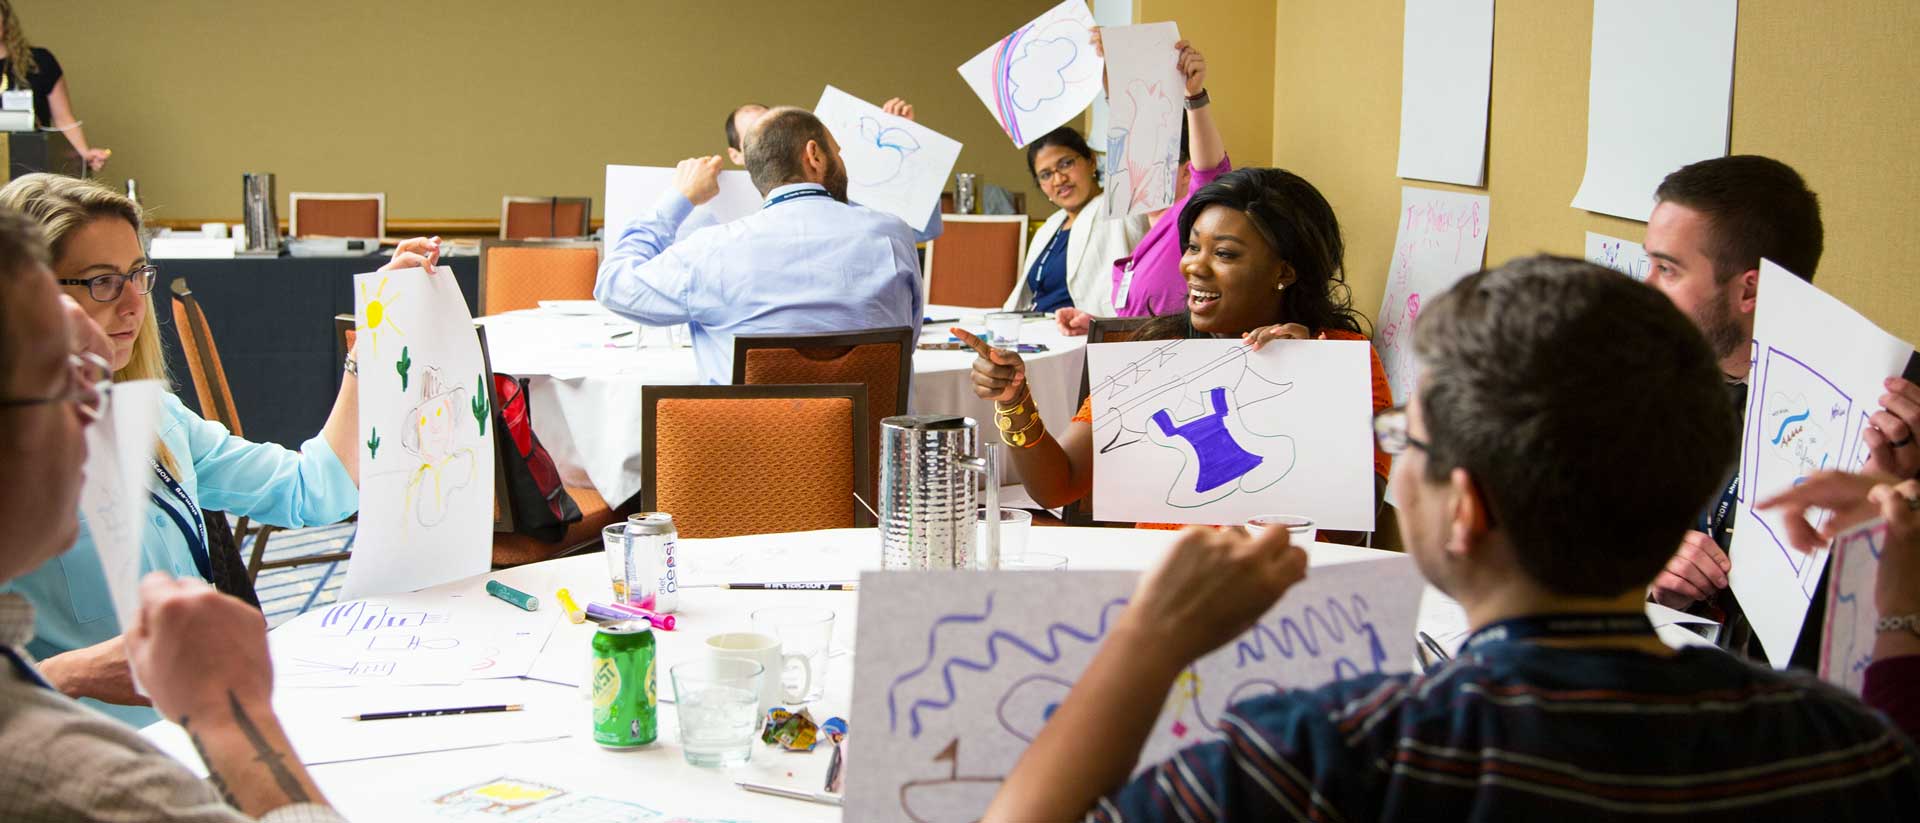 Participants holding up their collaborative drawings while learning how to take visual notes